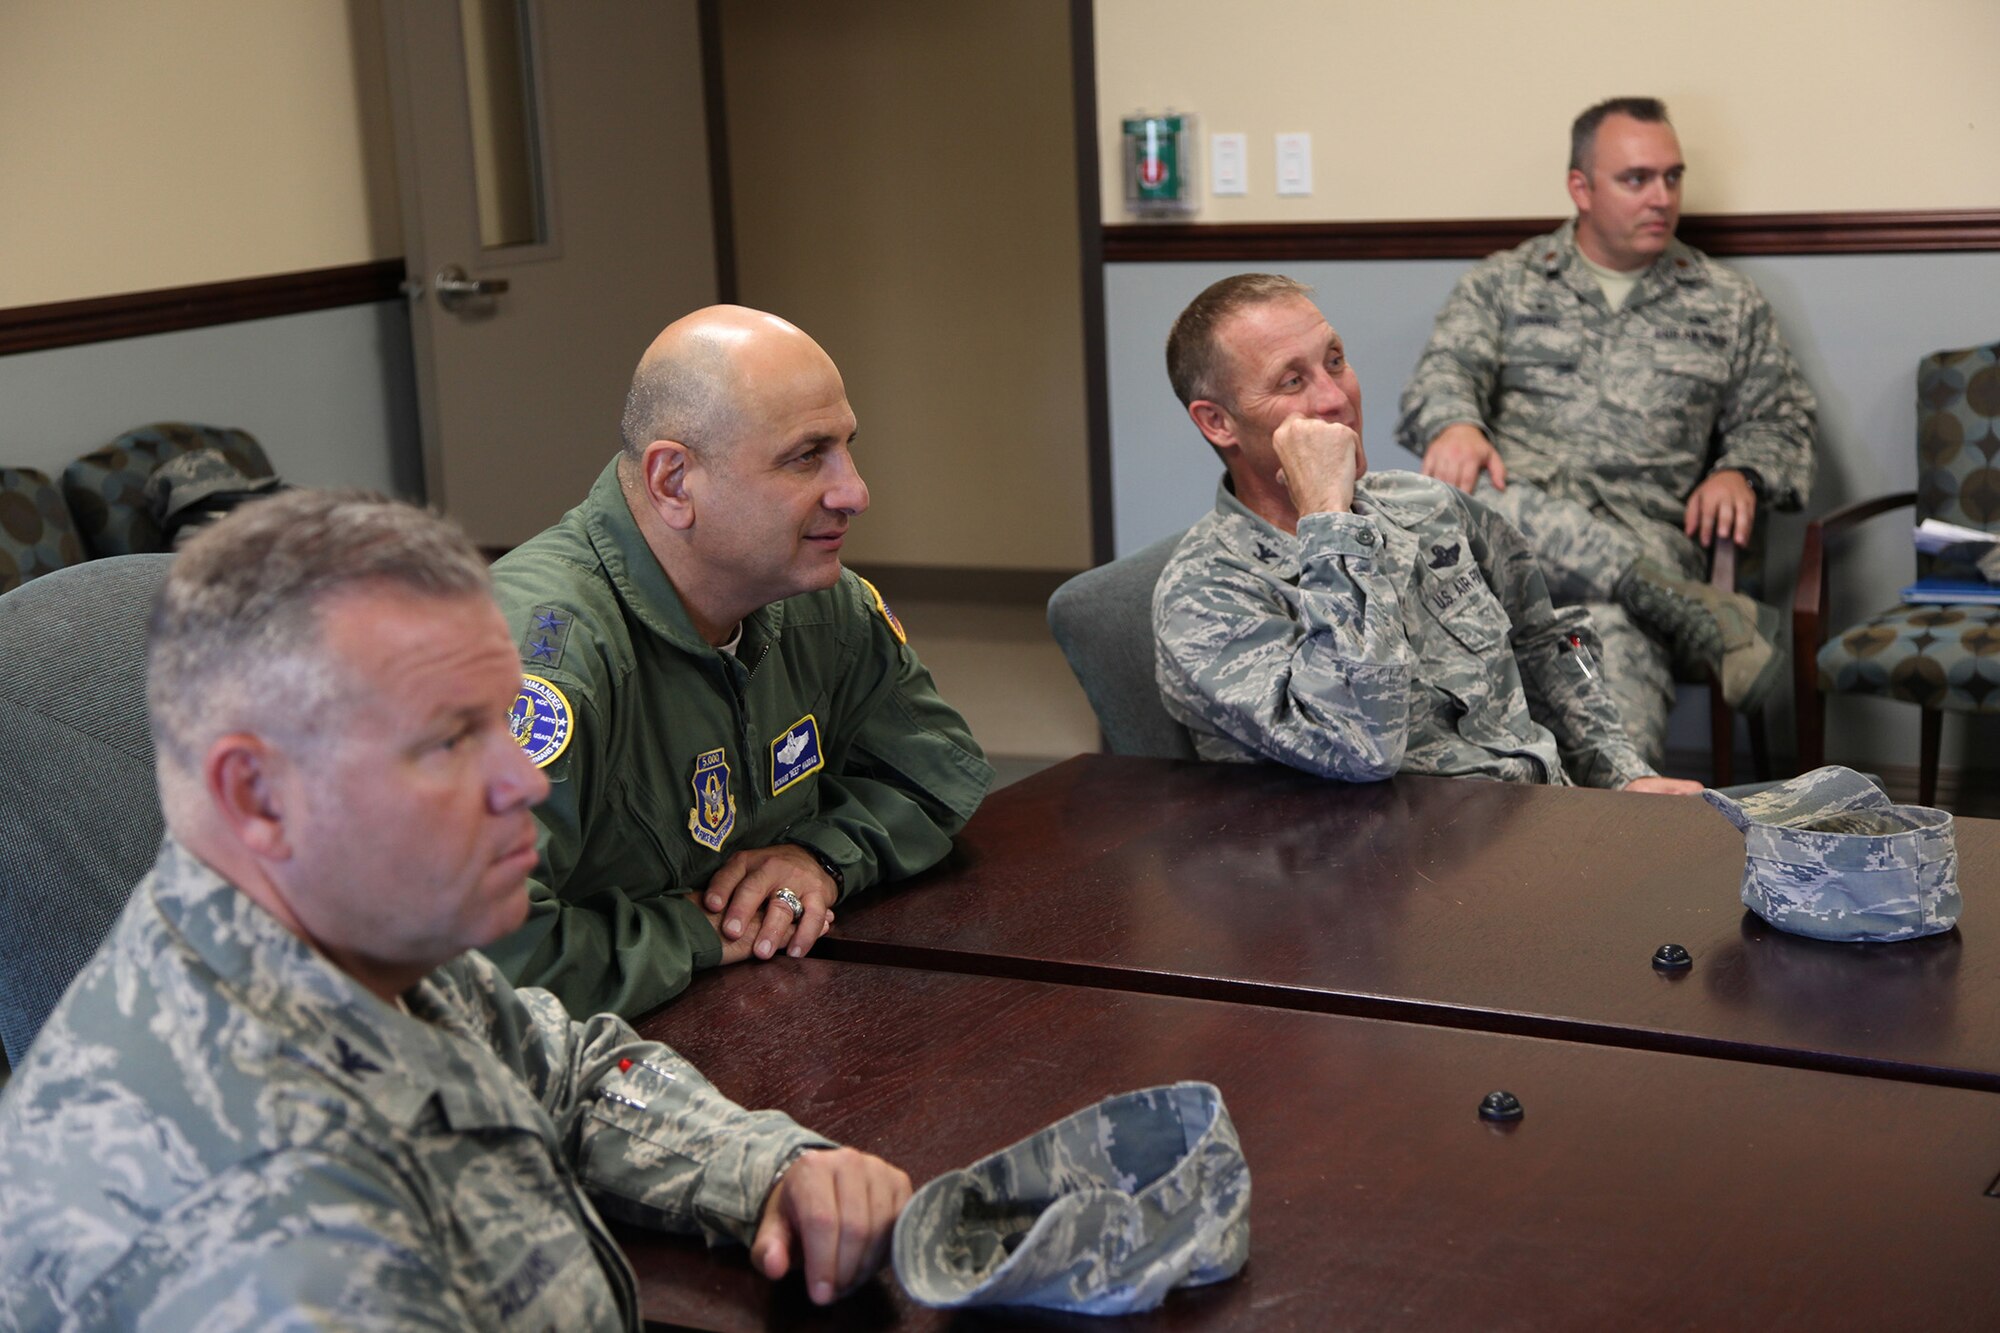 TRAVIS AIR FORCE BASE, Calif. --Col. Patrick T. Williams, Vice Commander of the 349th Air Mobility Wing;  Maj. Gen. Richard S. "Beef" Haddad, Vice Commander of the Air Force Reserve Command; and Col. Matthew J. Burger, Commander of the 349th Air Mobility Wing, listen as Tech. Sgt. Dolores Rodriguez, 349th Aerospace Medicine Squadron, briefs the wing's innovative fitness clinic at David Grant USAF Medical Center, Travis Air Force Base, Calif., June 21, 2014. The clinic streamlines the process for determining medical profiles; ensuring fitness testing is not delayed by administrative requirements. The general visited facilities and met with Airman to see air mobility innovations helping Travis AFB personnel deliver America's hope and might around the globe. (U.S. Air Force photo/Lt. Col. Robert Couse-Baker)